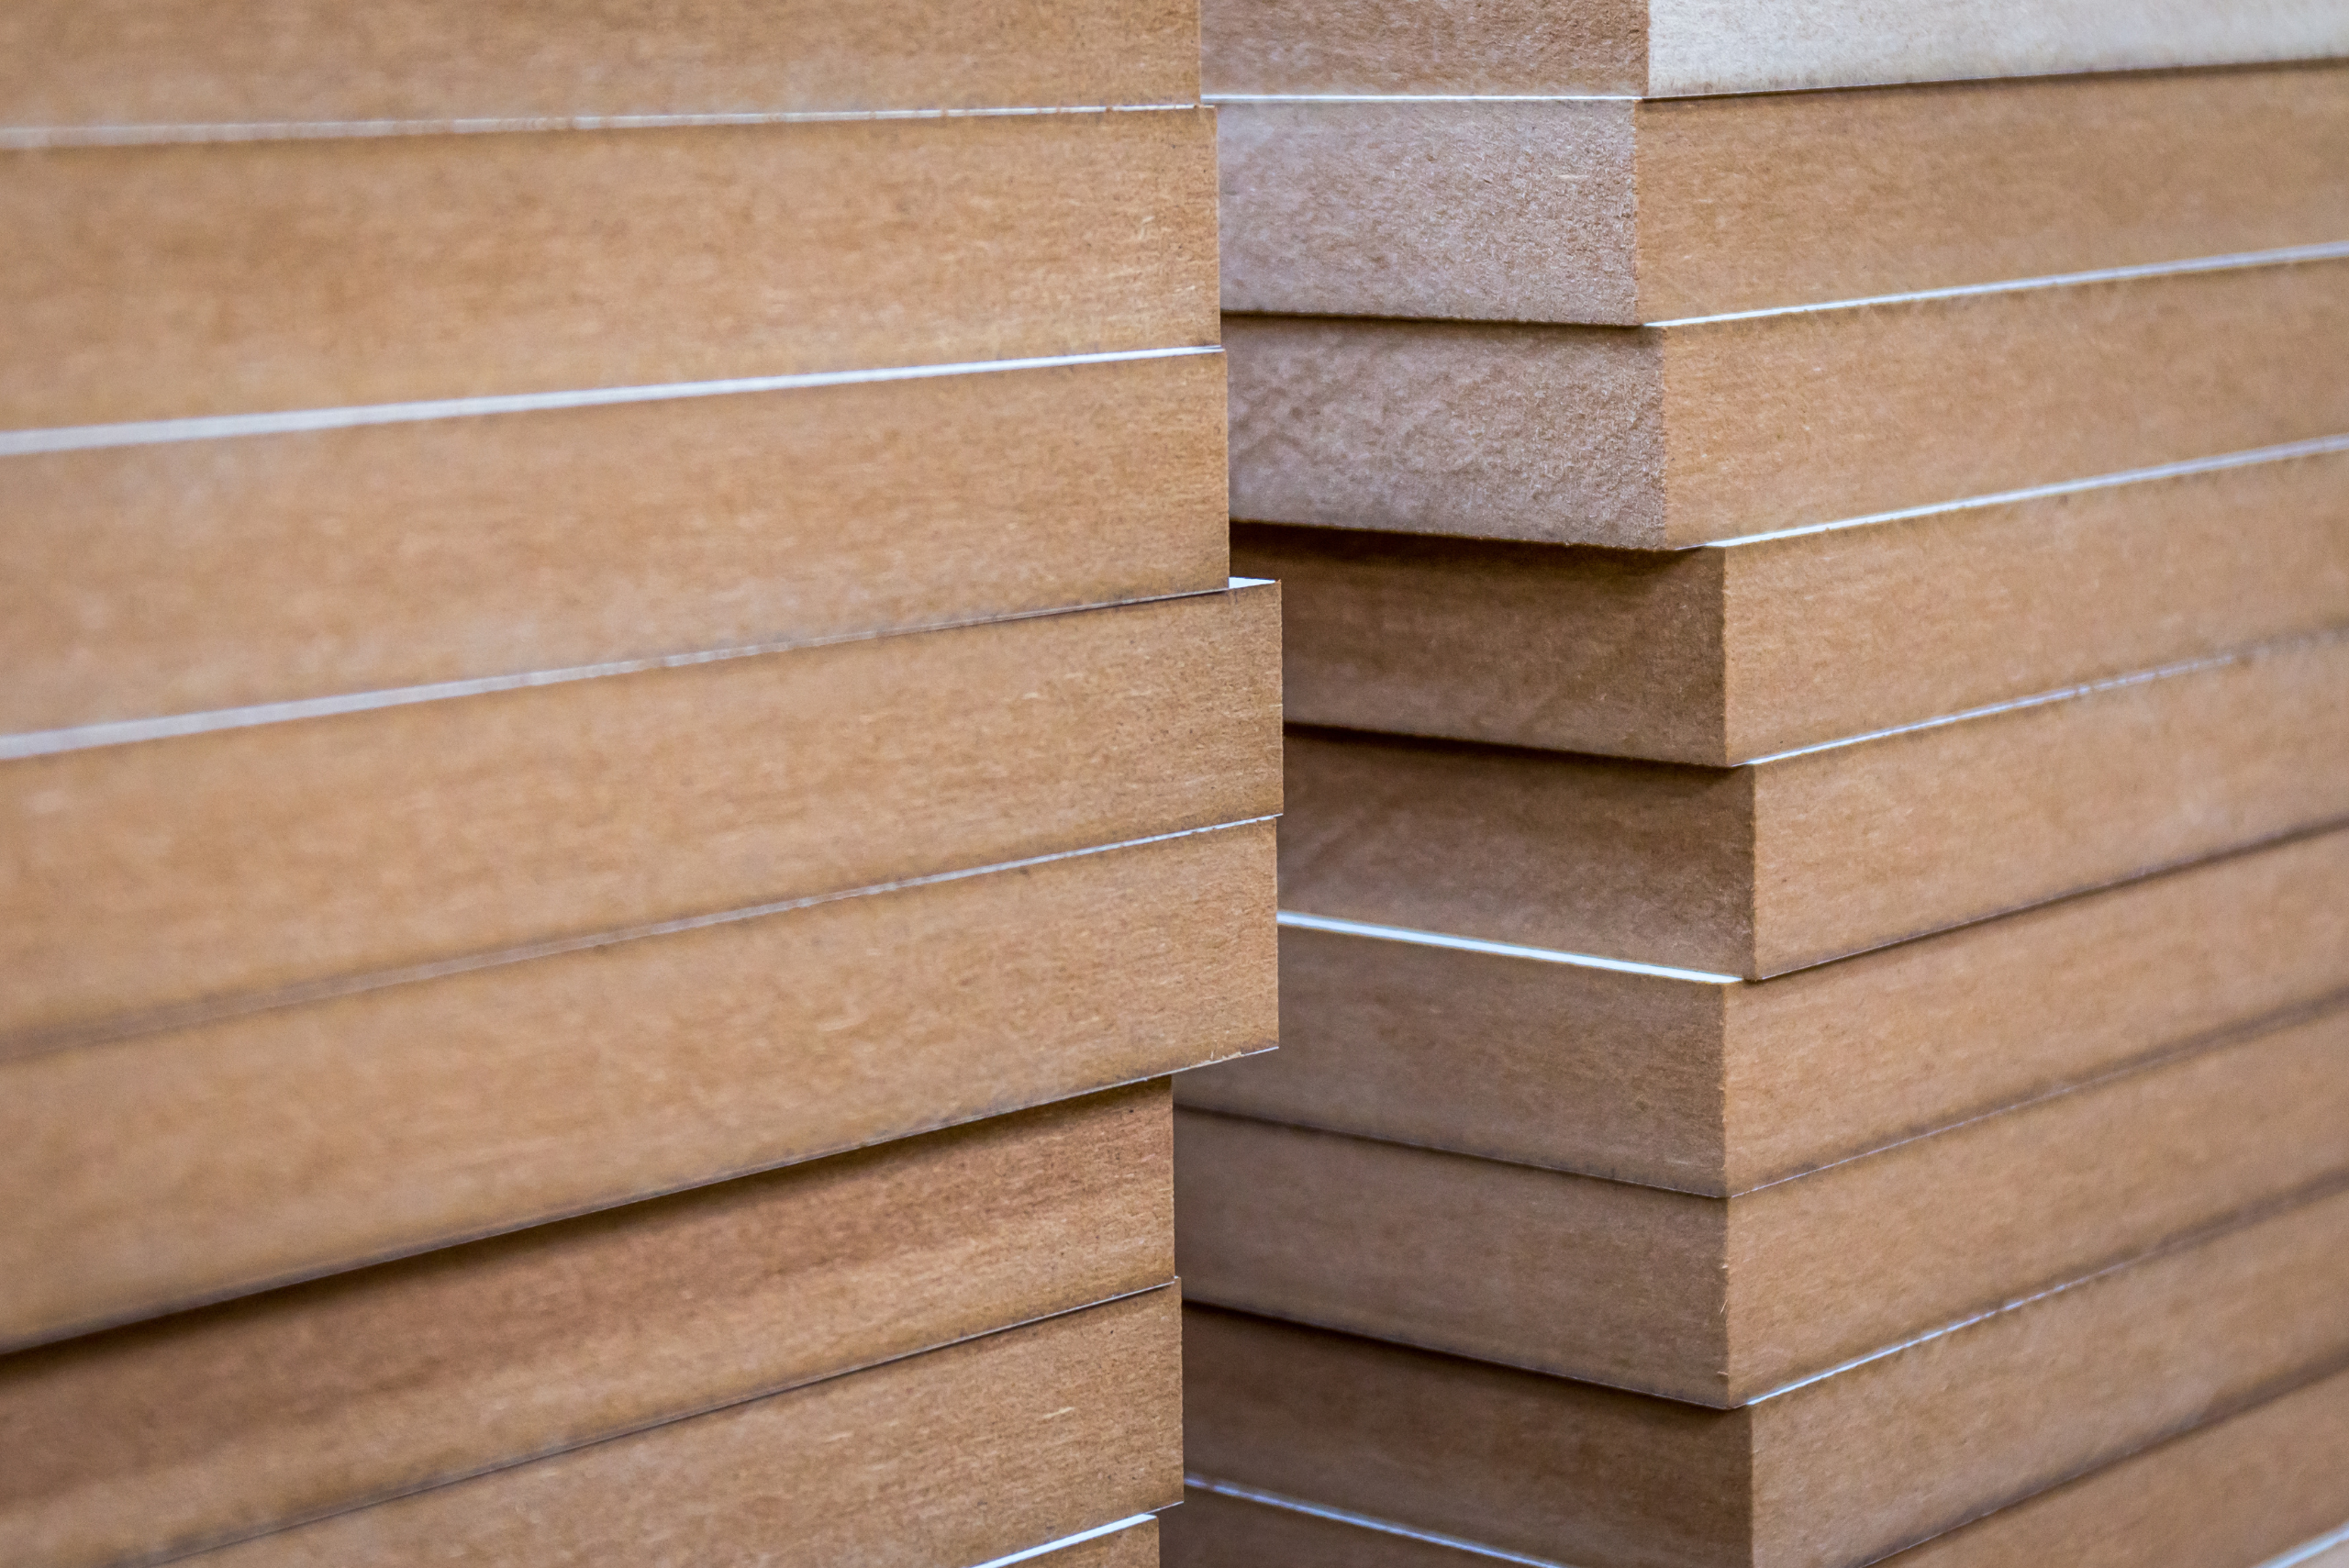 Stack of MDF boards